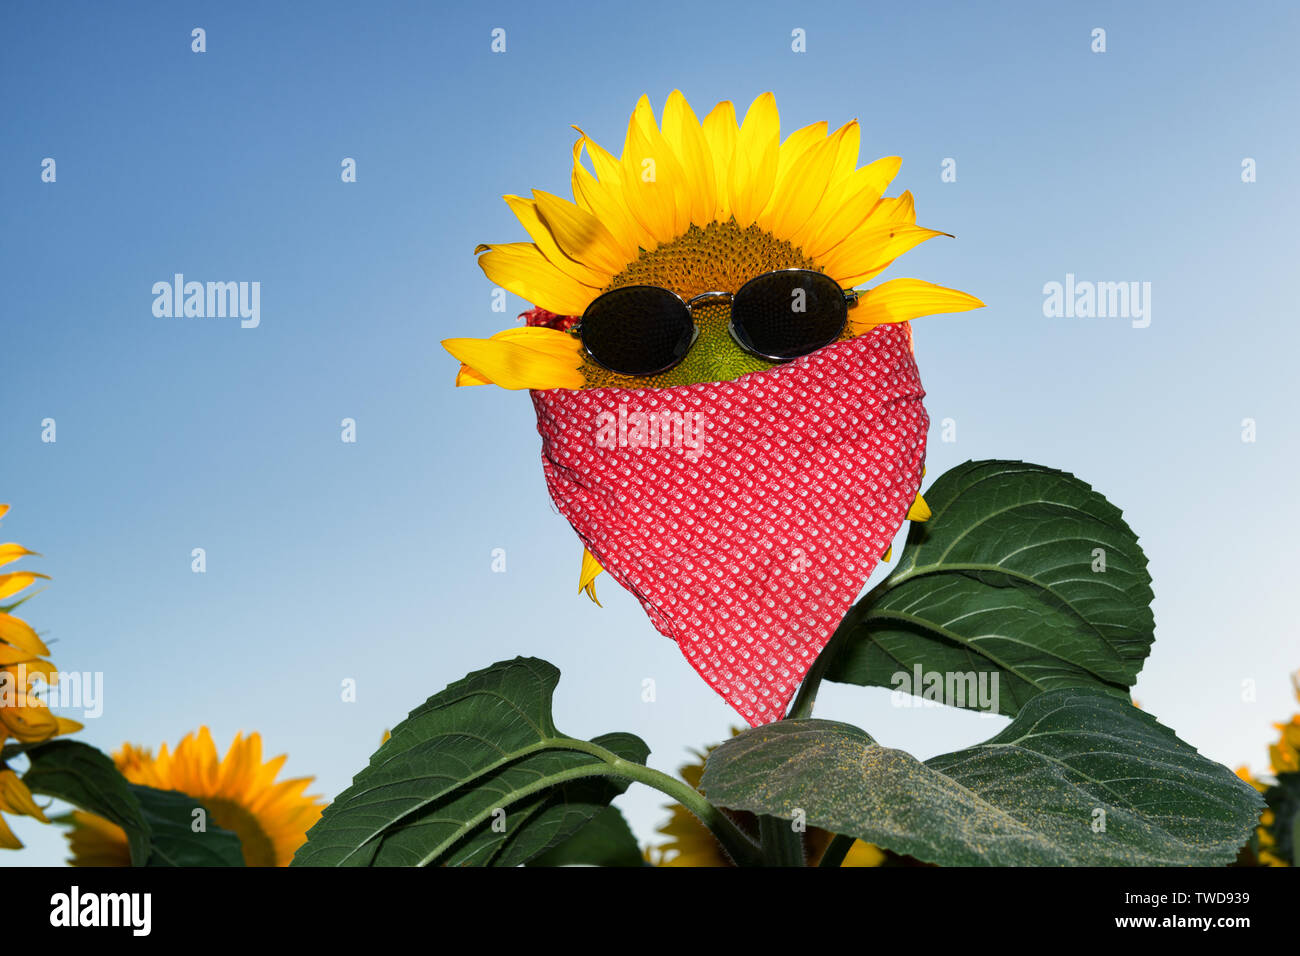 Funny sunflower dressed in neckerchief and sunglasses. Vacations concept. Stock Photo